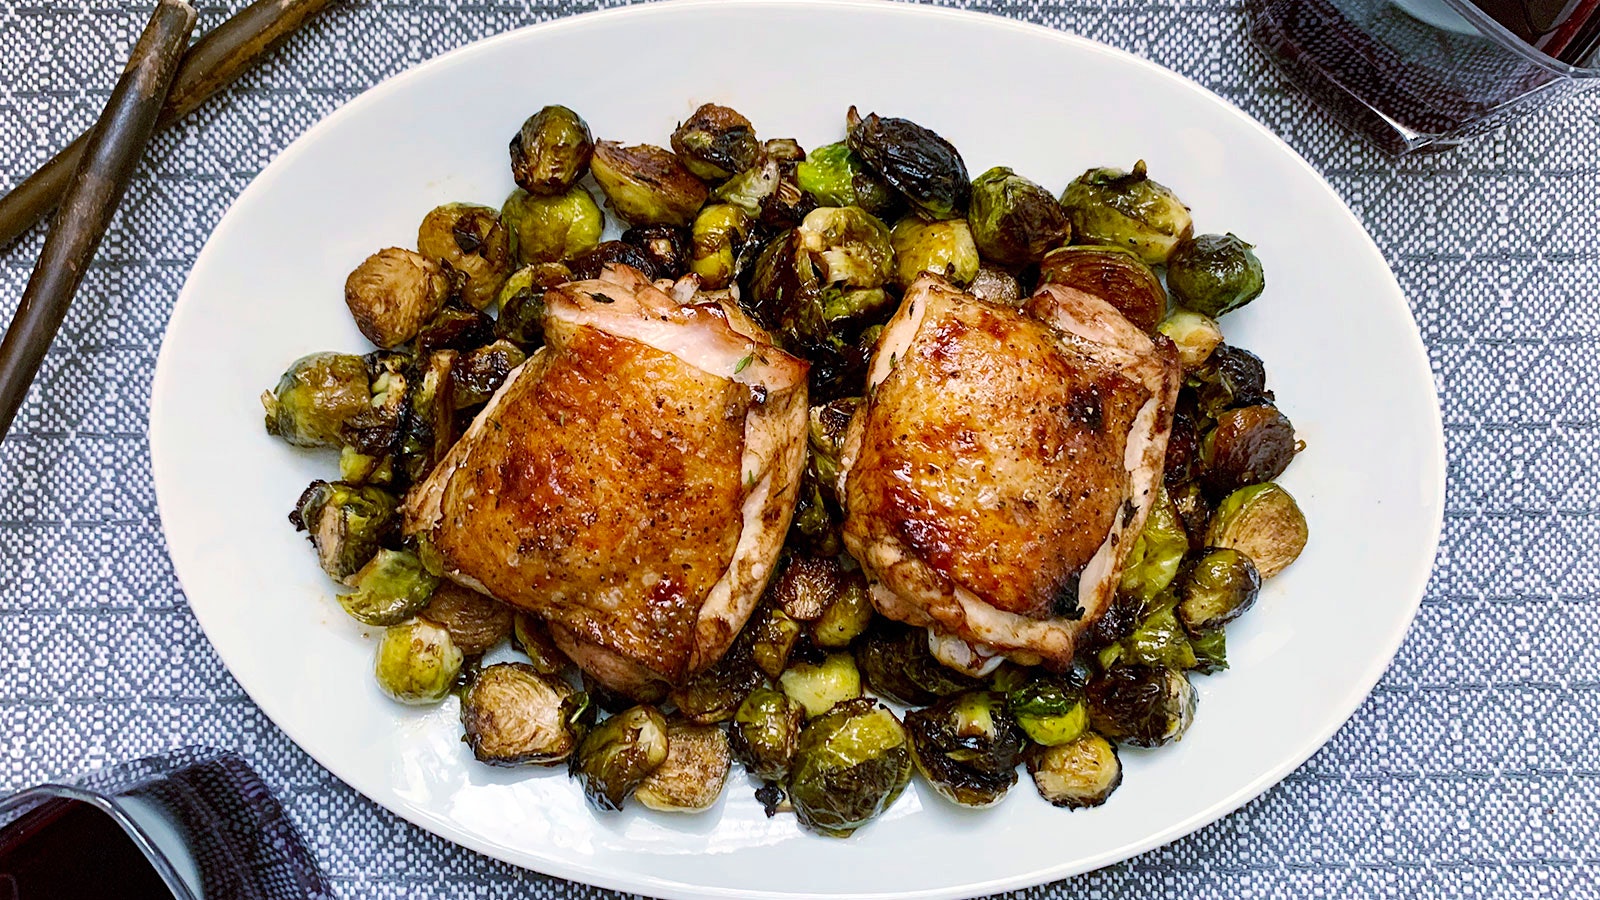  Two crispy-skinned chicken thighs on a white plate with balsamic-roasted brussels sprouts 